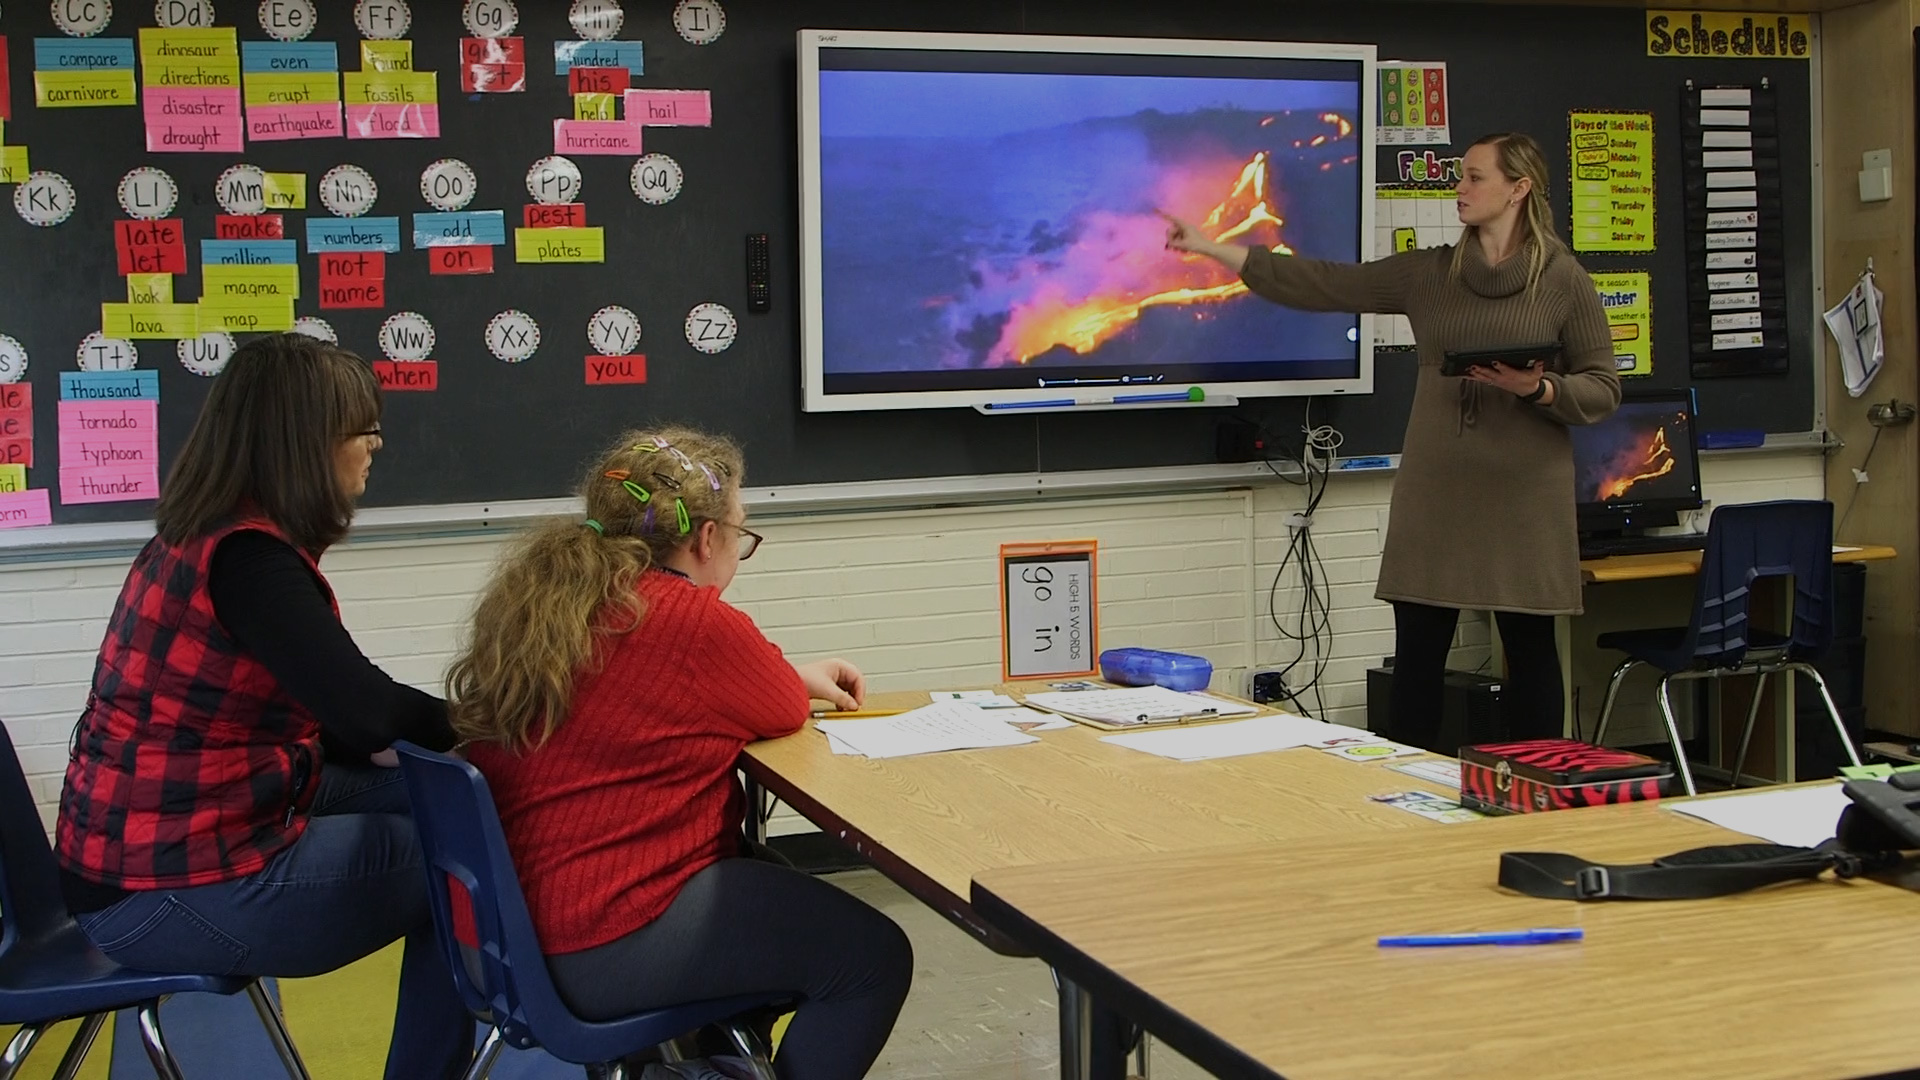 Teacher addresses pupils in front of classroom with TV screen showing volcano erupting